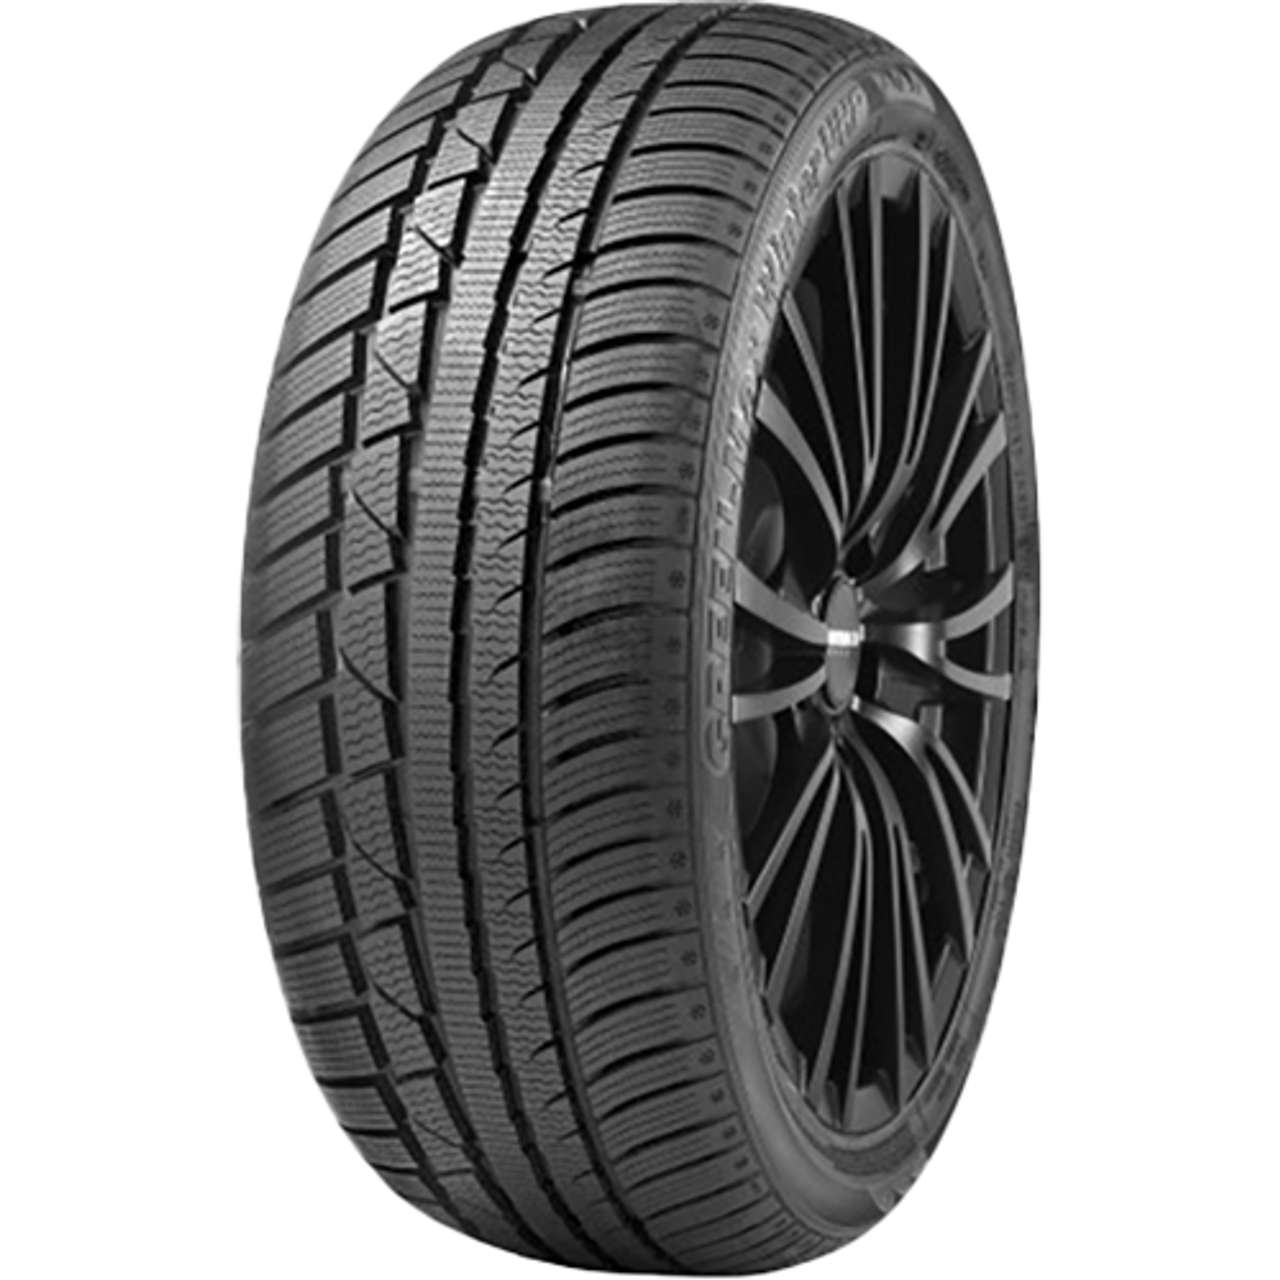 LINGLONG GREEN-MAX WINTER UHP 245/45R18 100H MFS BSW XL